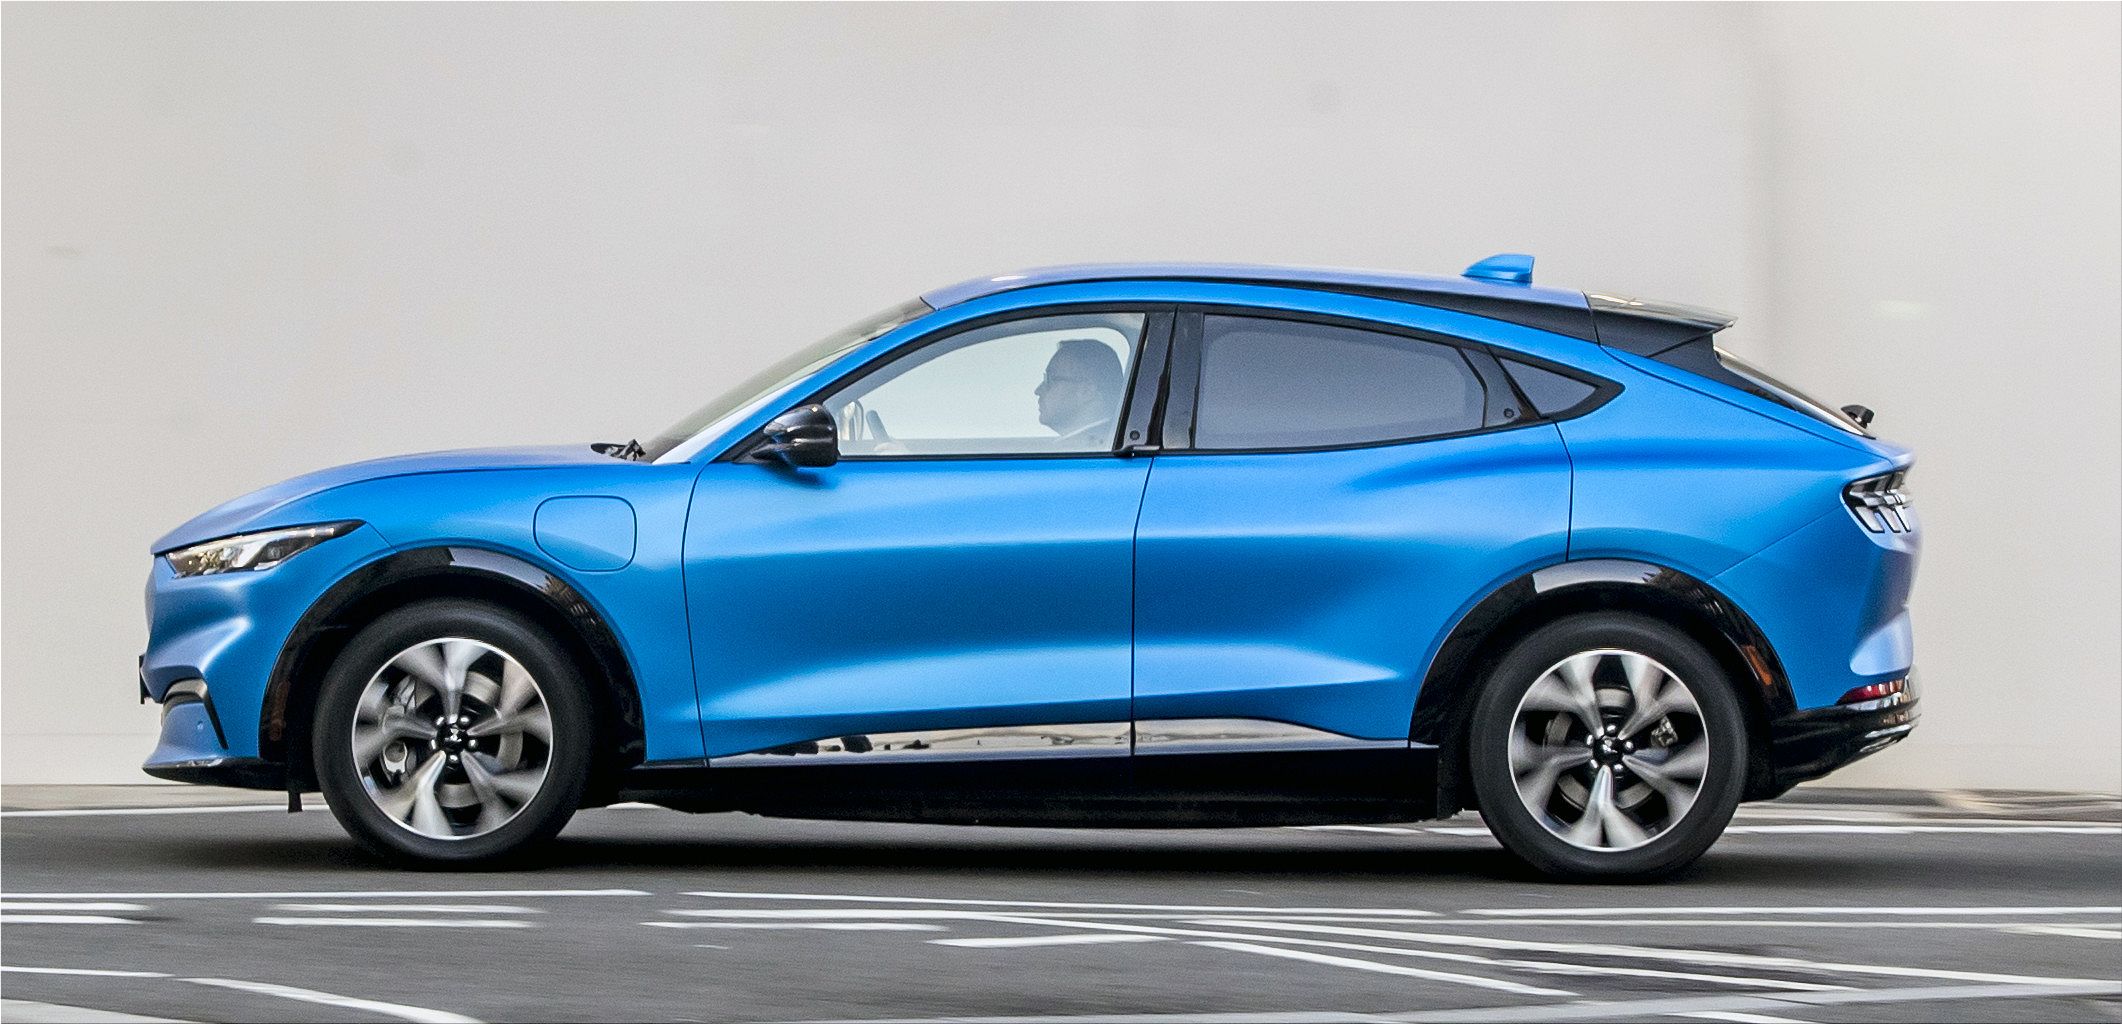 Ford Mustang MachE electric SUV delivers even faster charging